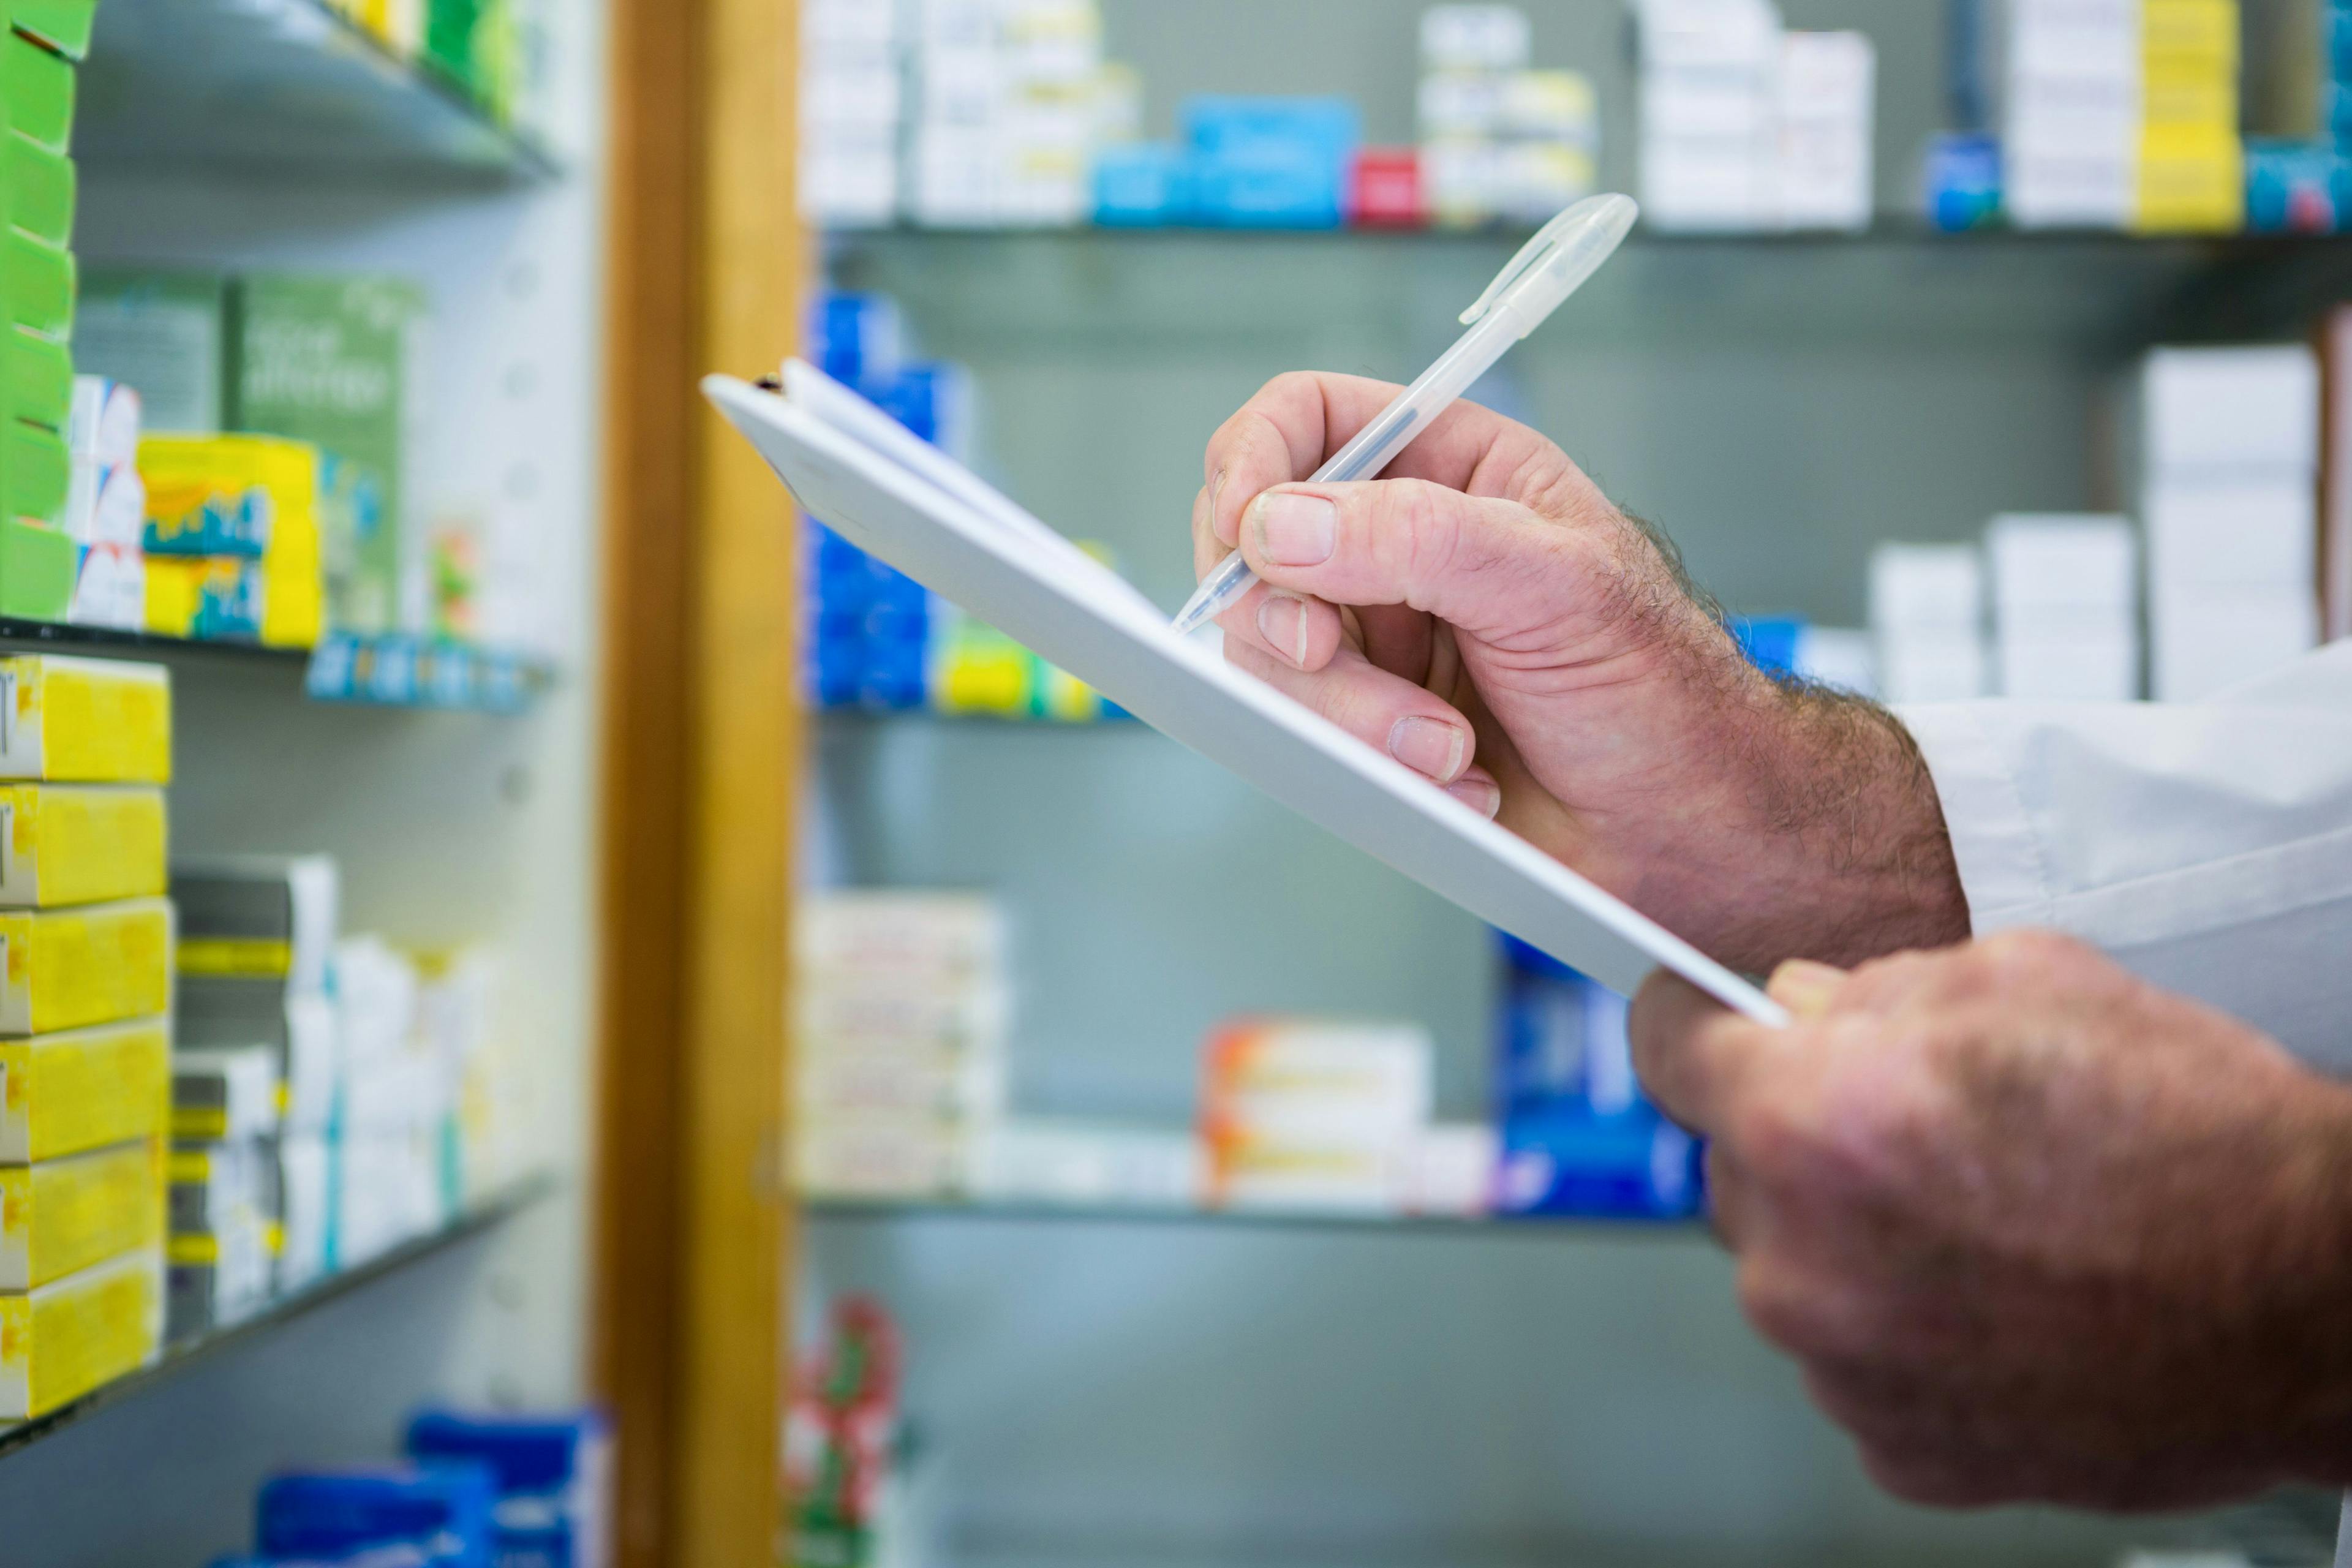 Communication in Team-Based Care Can Have Effective Outcomes for Pharmacists